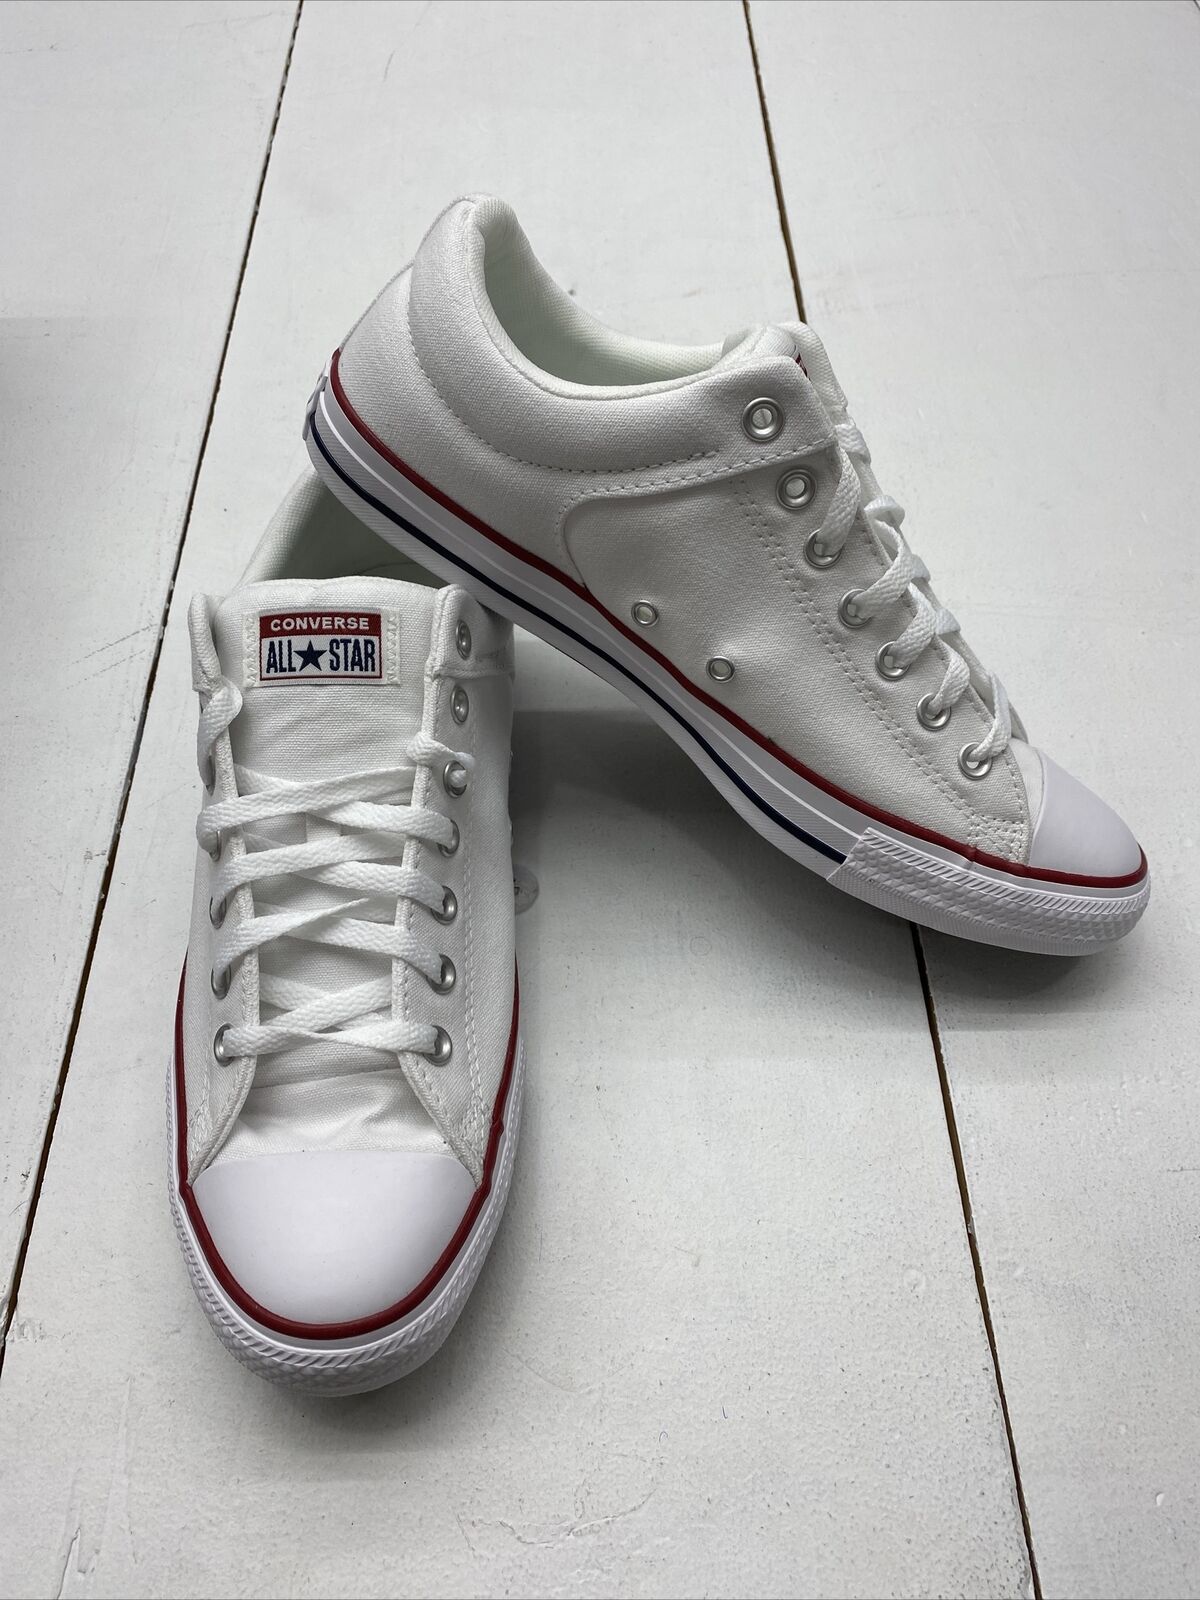 Spiritus Oswald masser Converse All Star Low Top A01717F White Canvas Sneakers Men Size 11.5/ -  beyond exchange